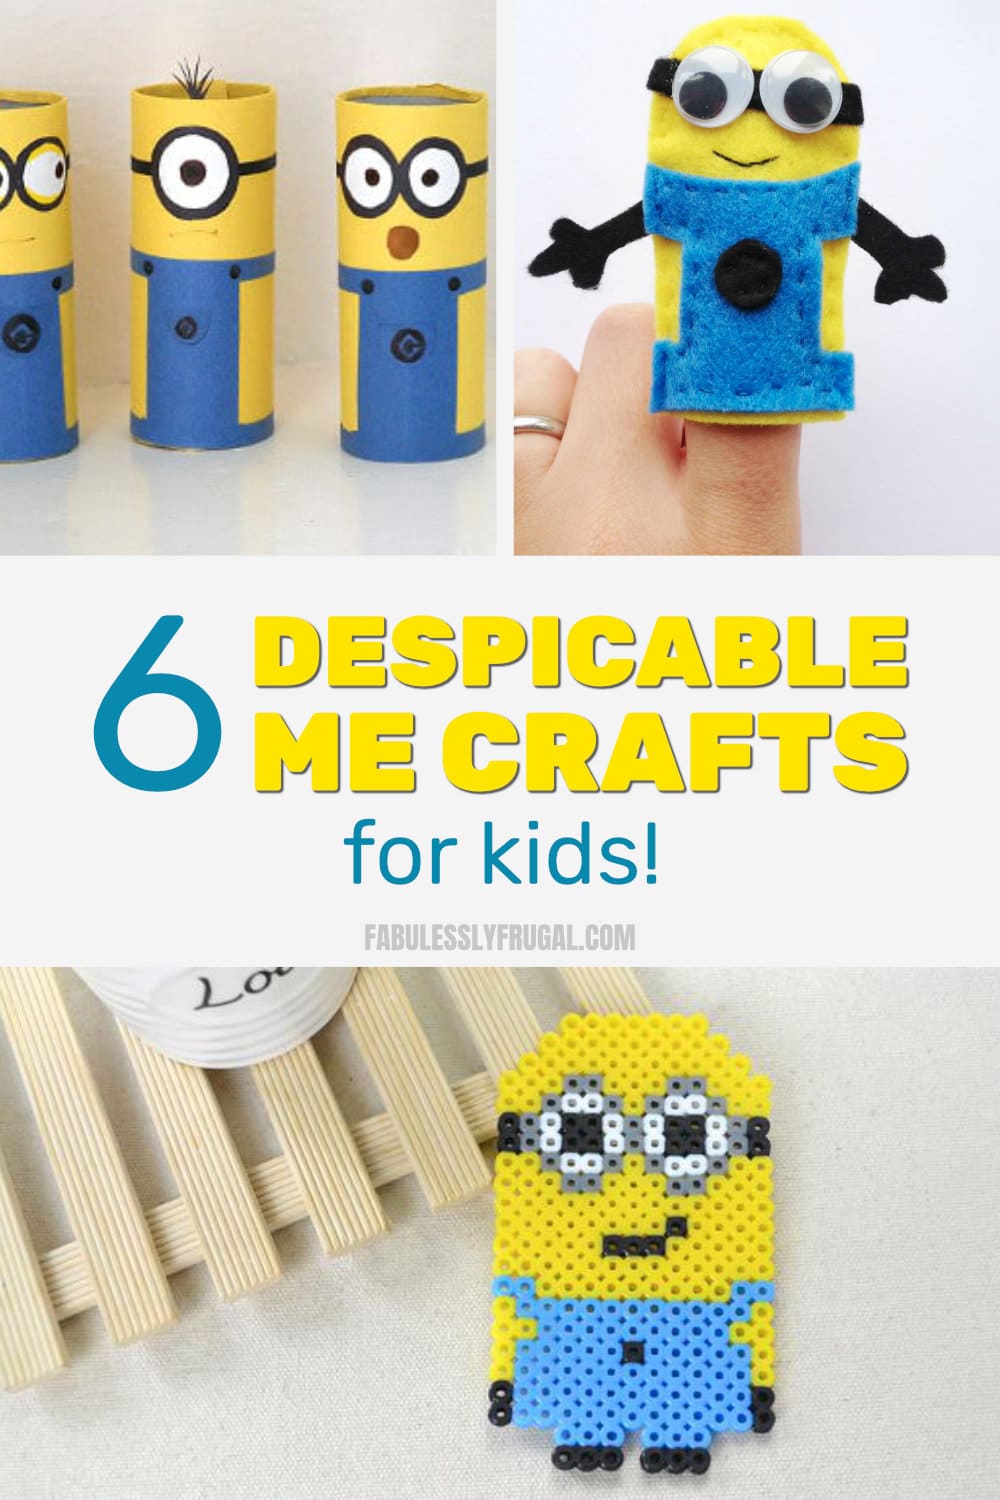 Quick & Easy: 50+ Crafts to Do at Home for Instant Fun - Mod Podge